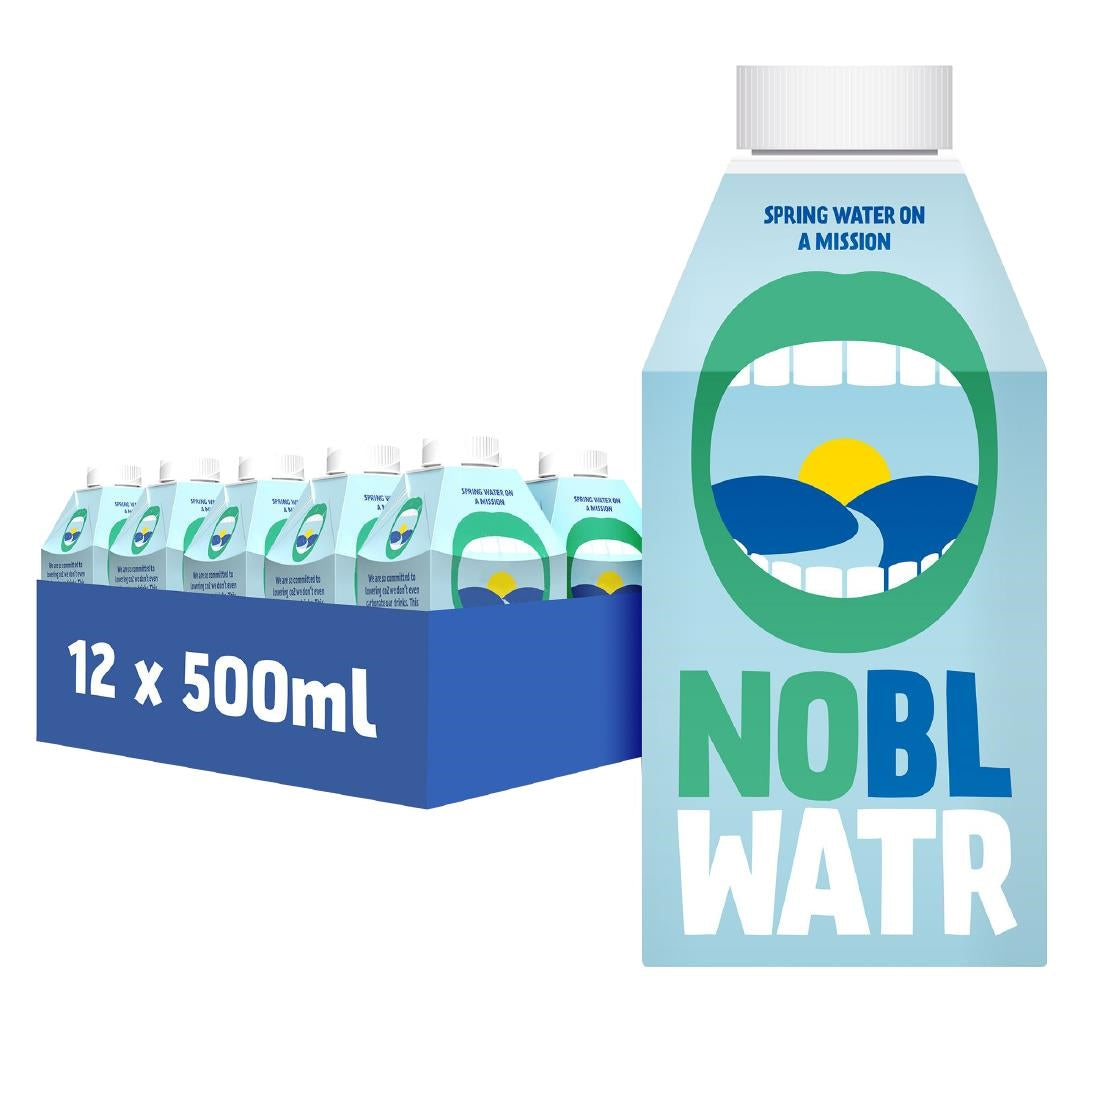 FX198 NOBL Spring Water Cartons 500ml (Pack of 12)